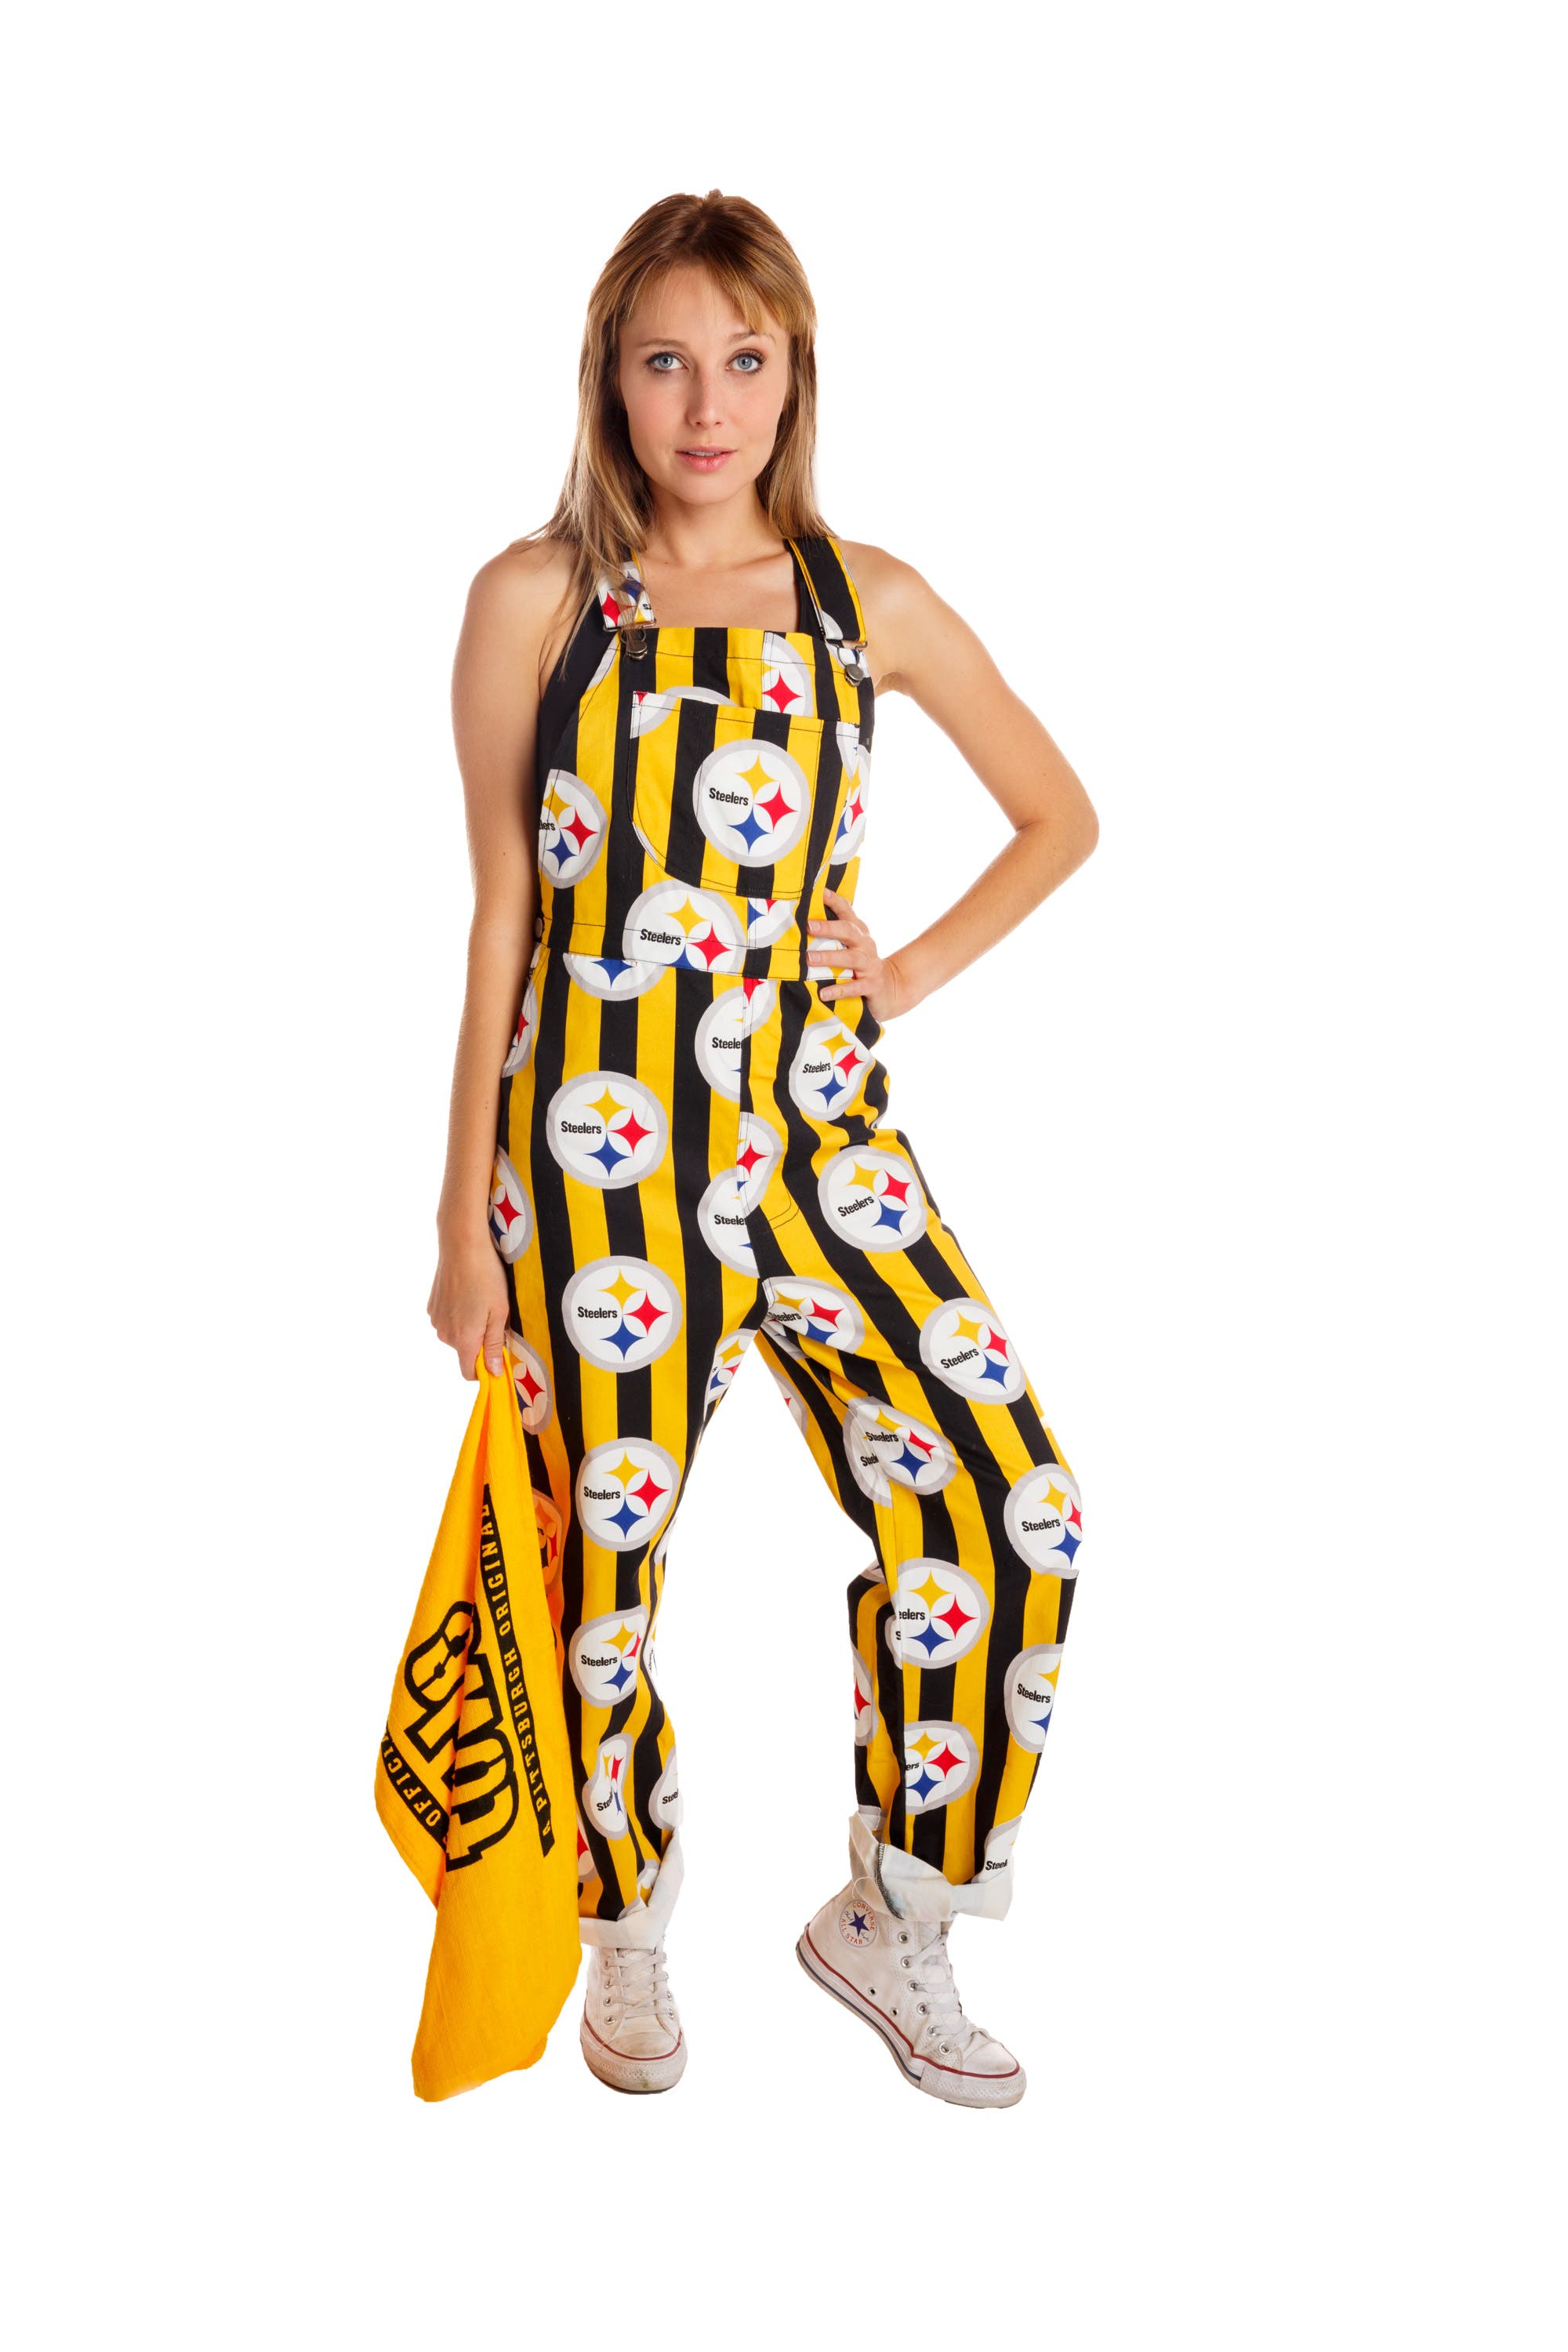 Ladies NFL Overalls  The Pittsburgh Steelers